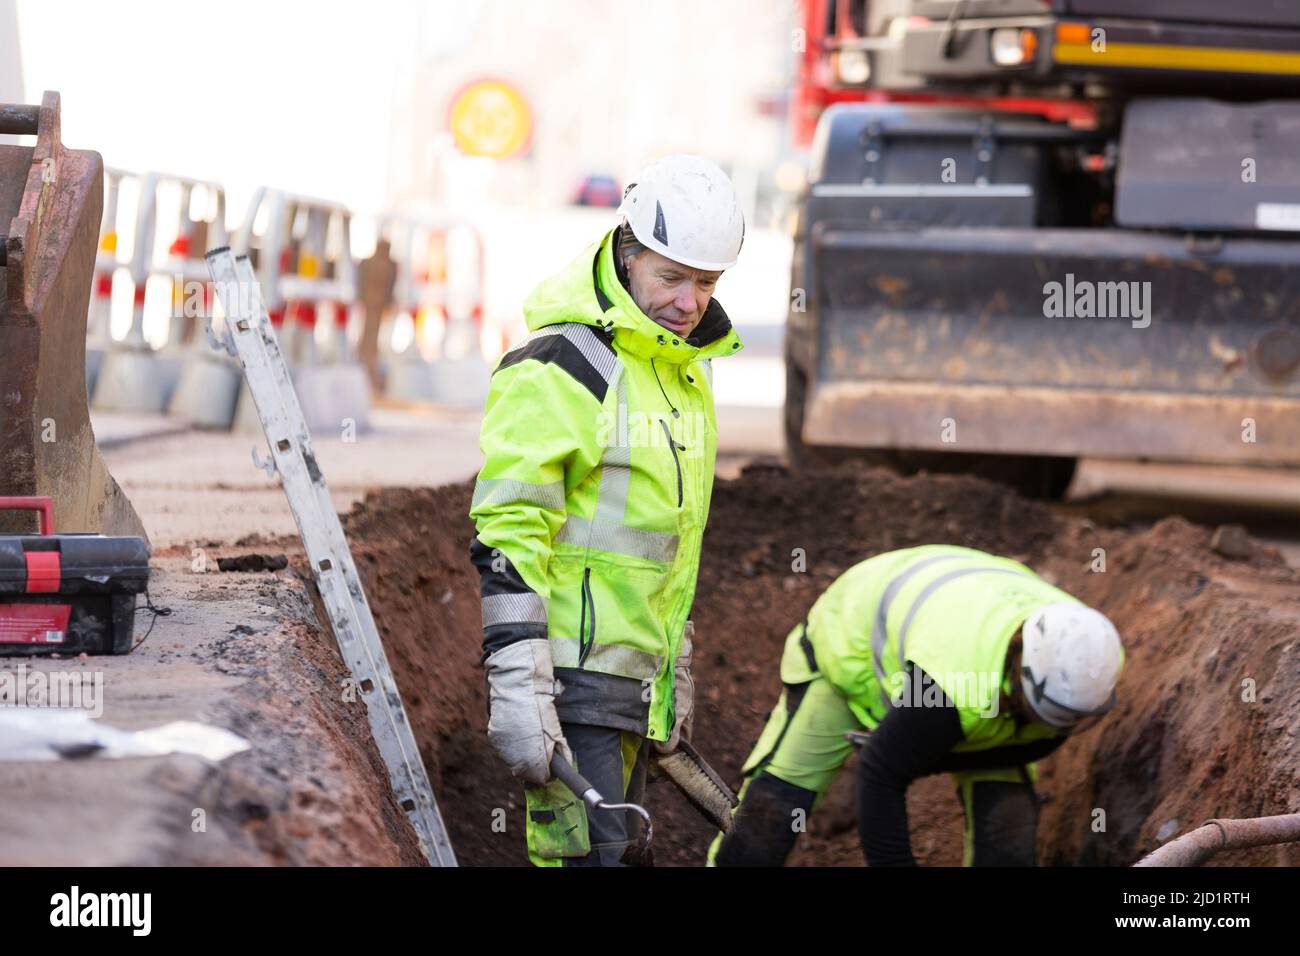 Workers in reflective clothing during work Stock Photo